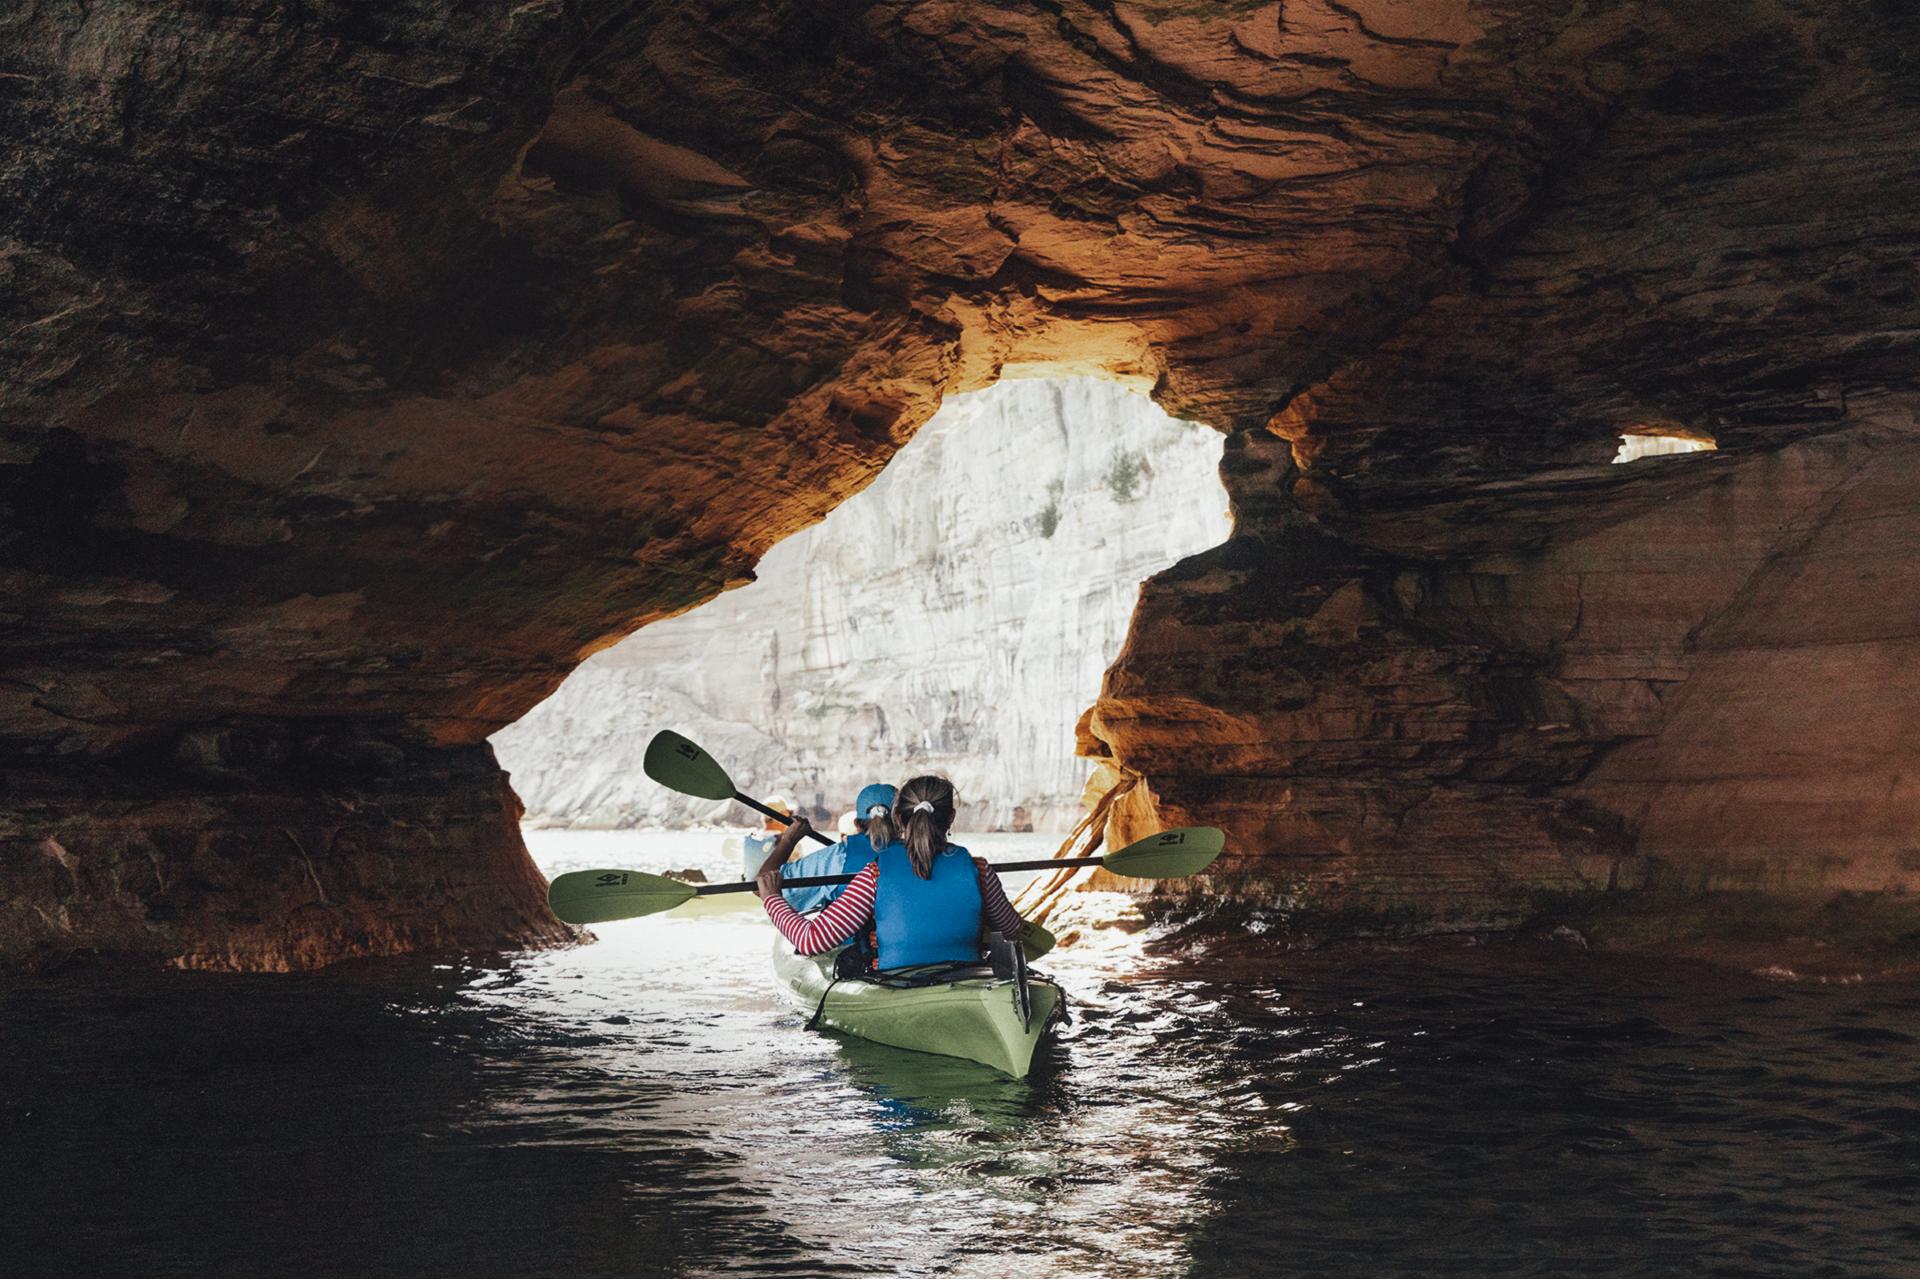 Pictured Rocks kayakers in a cavern